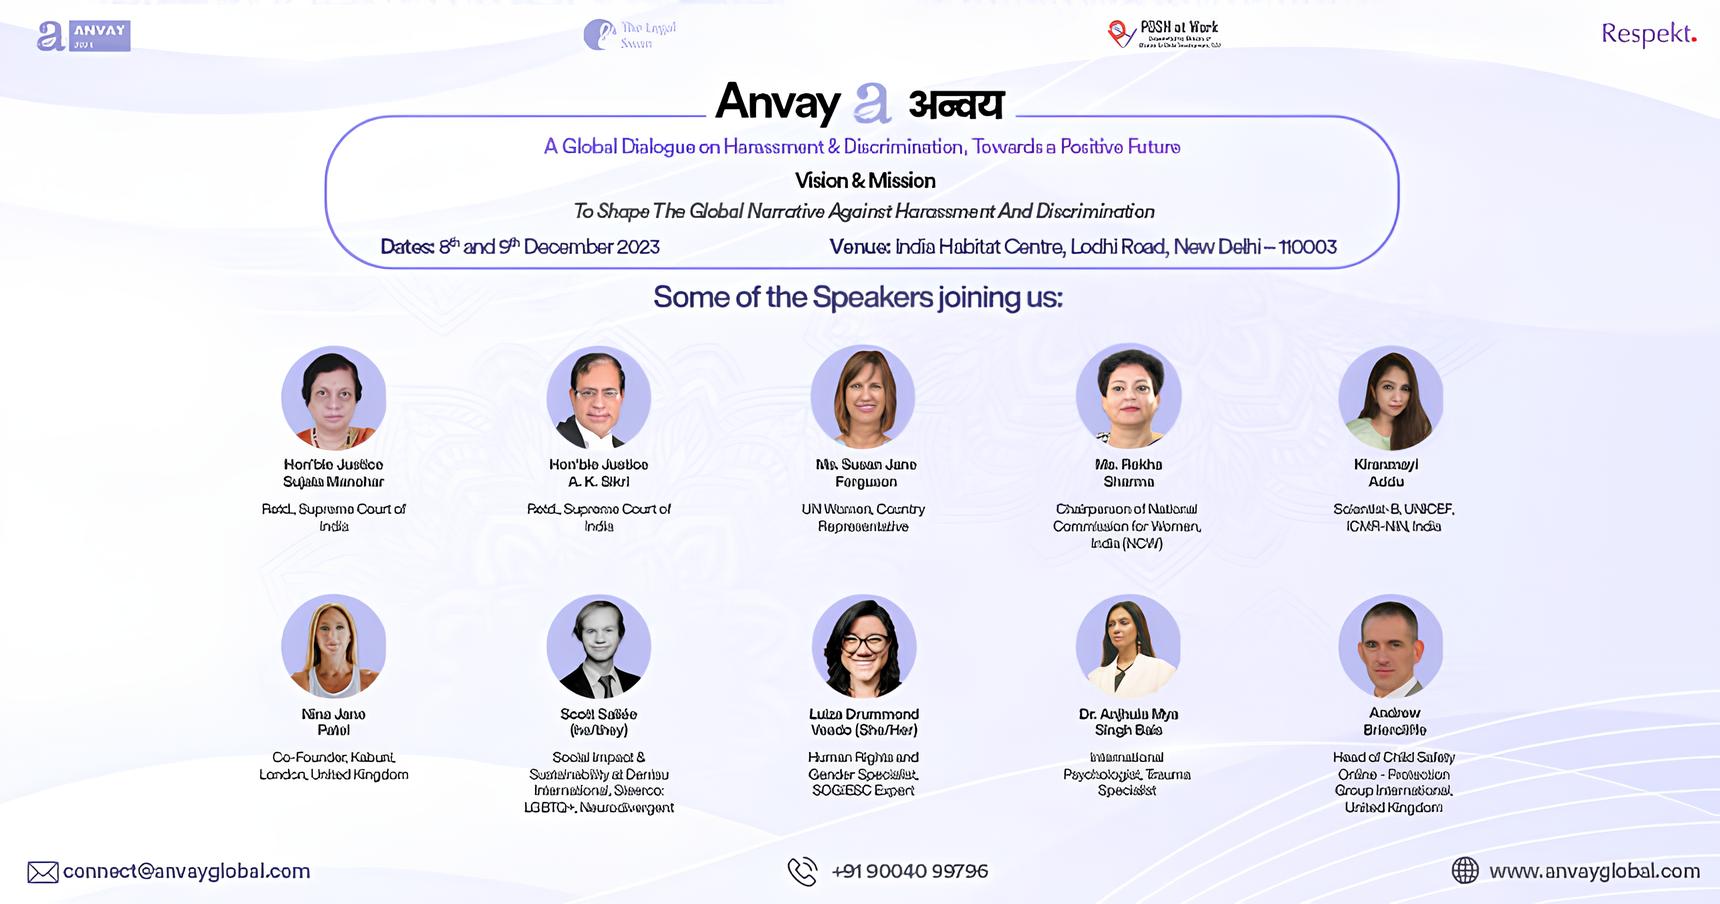 Legal Swan to host global dialogue on harassment & discrimination: Anvay